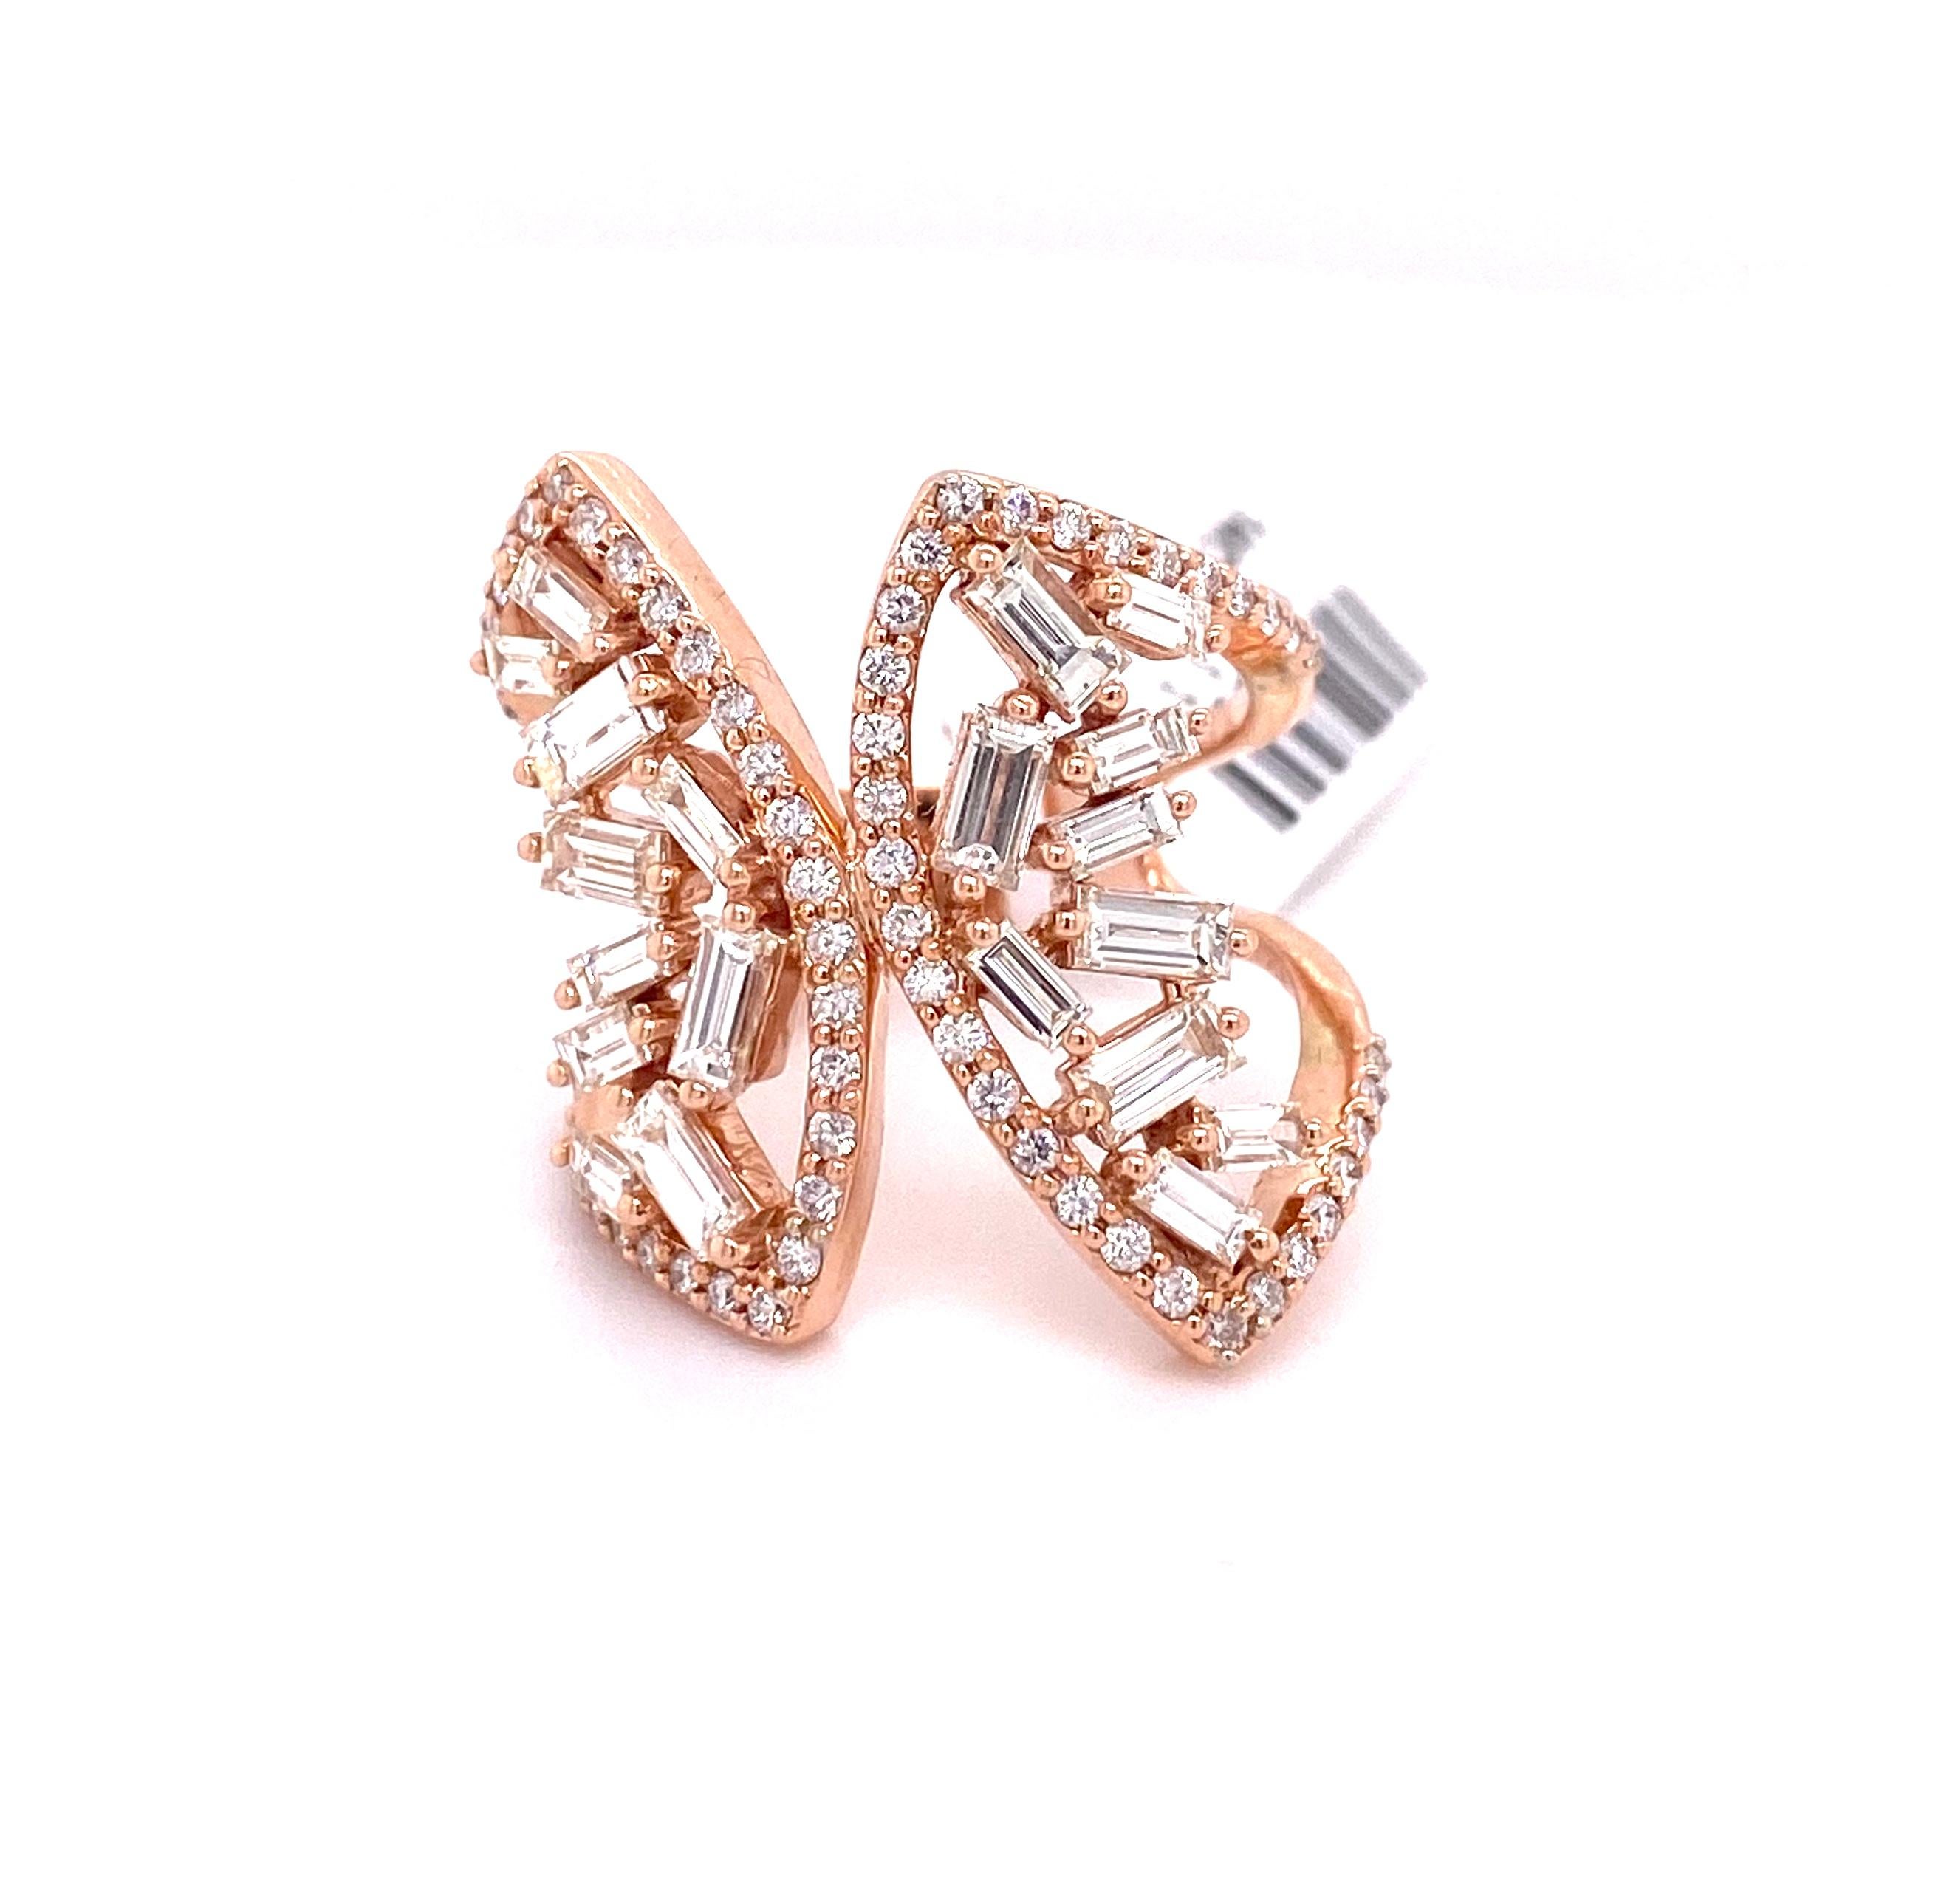 1.9 Carat Diamond and Baguette Fashion Ring in 14K Rose Gold 
Ring Size 6 1/2 US
B: 1.5CT / D: 0.48CTW
Weight: 6.1 Grams